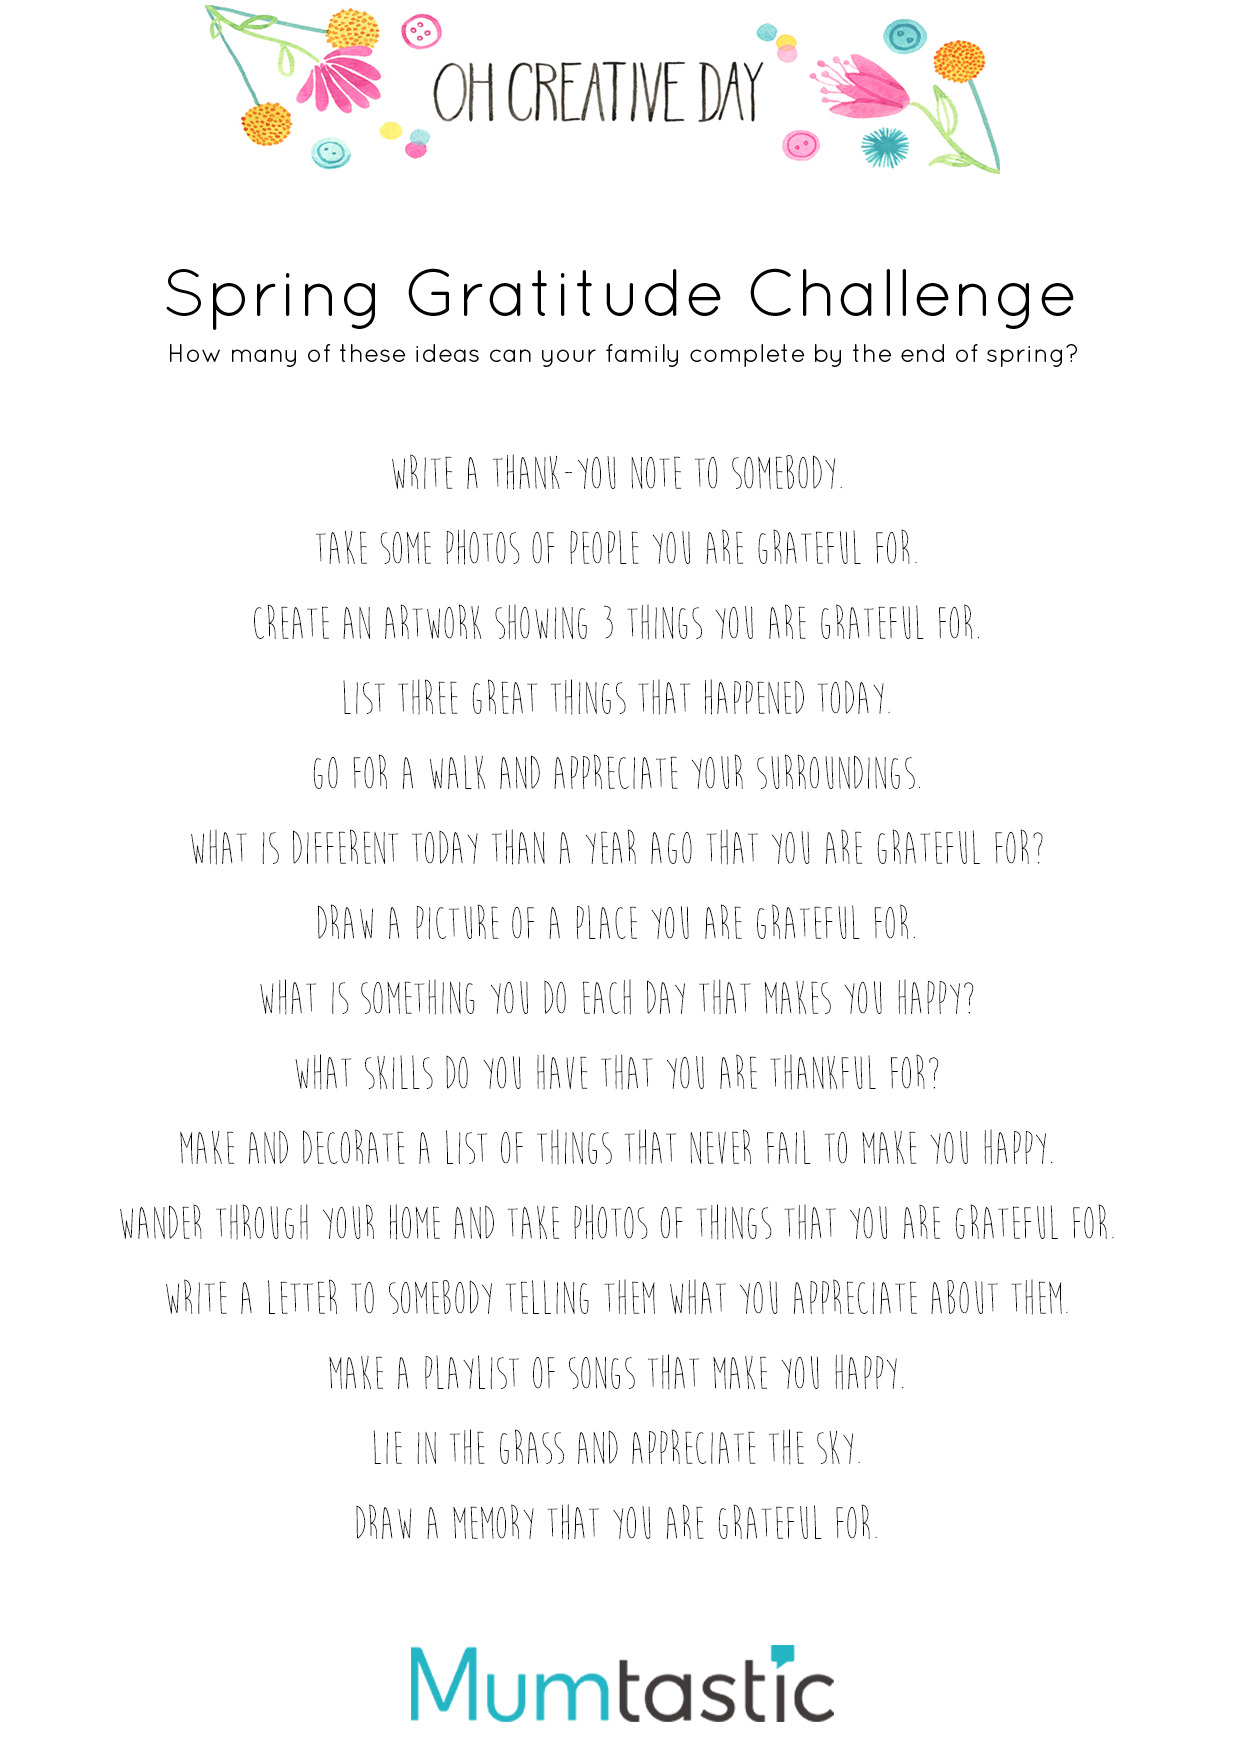 Oh Creative Day and Mumtastic Gratitude Challenge